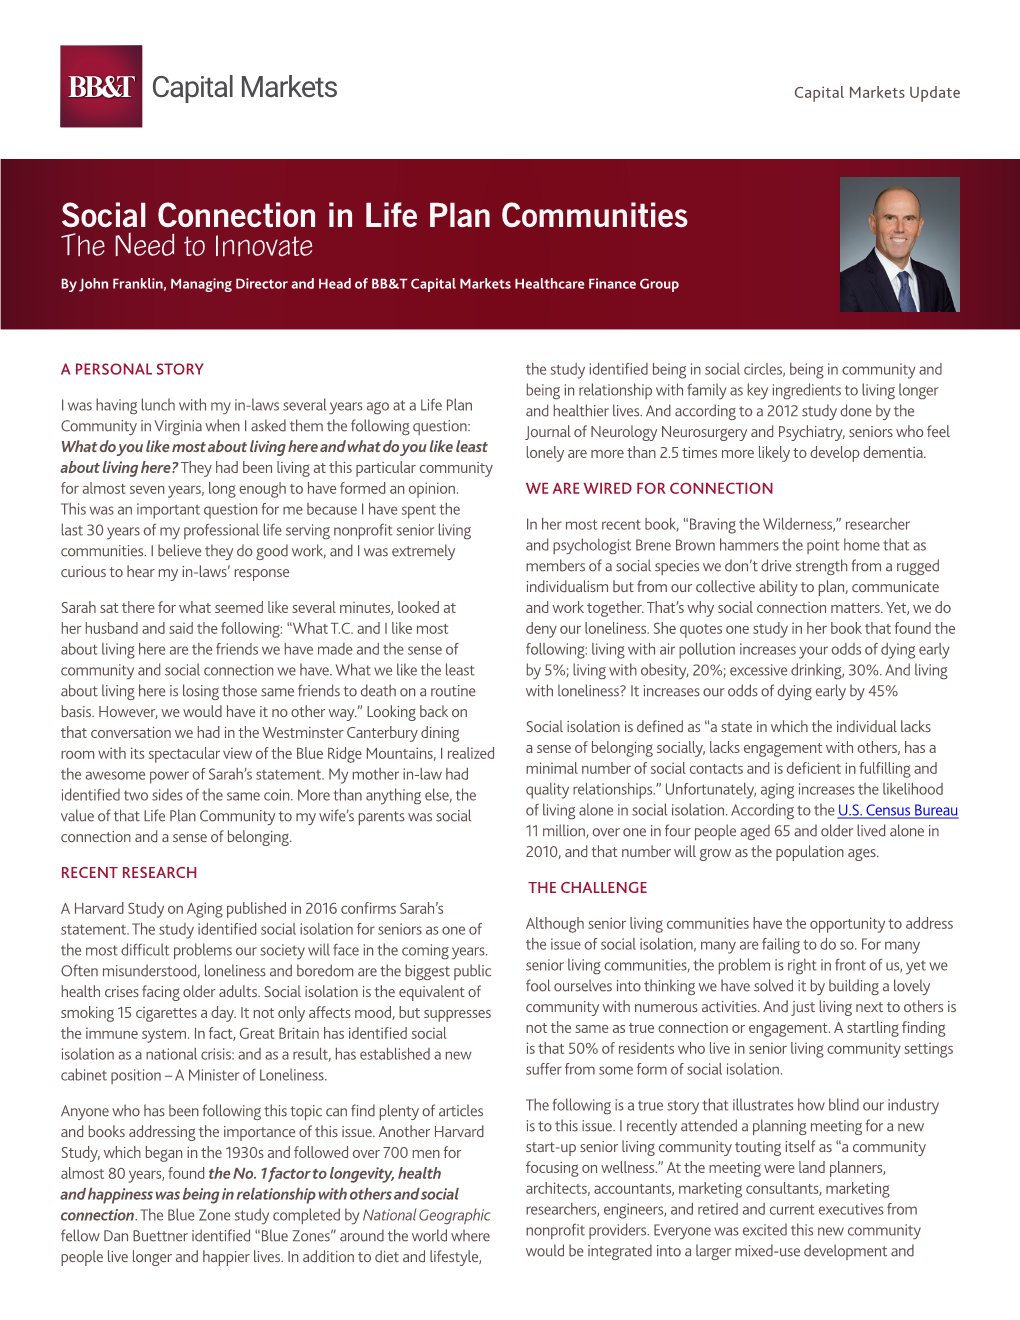 Social Connection in Life Plan Communities the Need to Innovate by John Franklin, Managing Director and Head of BB&T Capital Markets Healthcare Finance Group